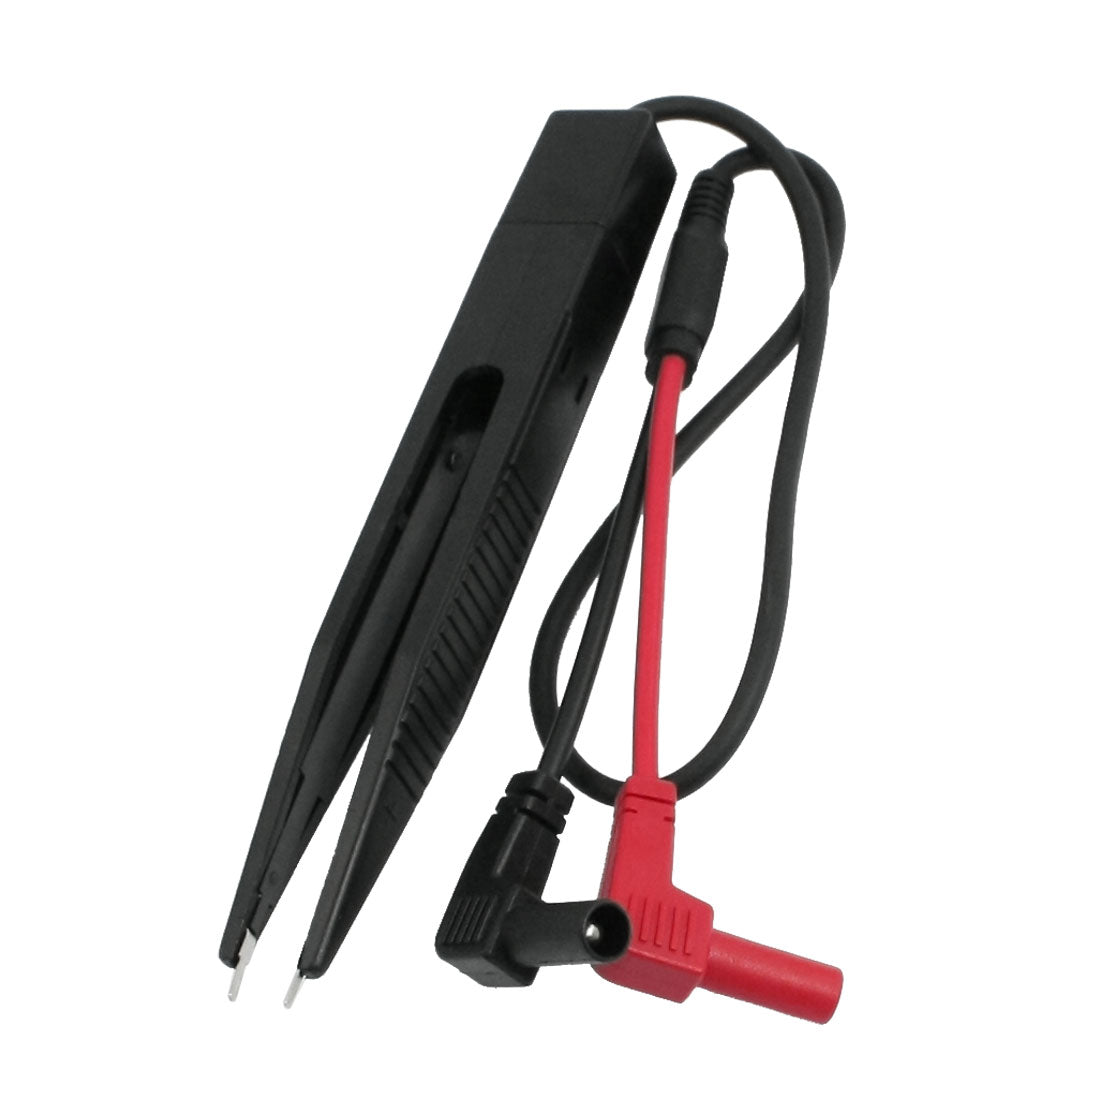 uxcell Uxcell 24" Length Cable Banana Connector Multimeter Test Lead Probe Black Red